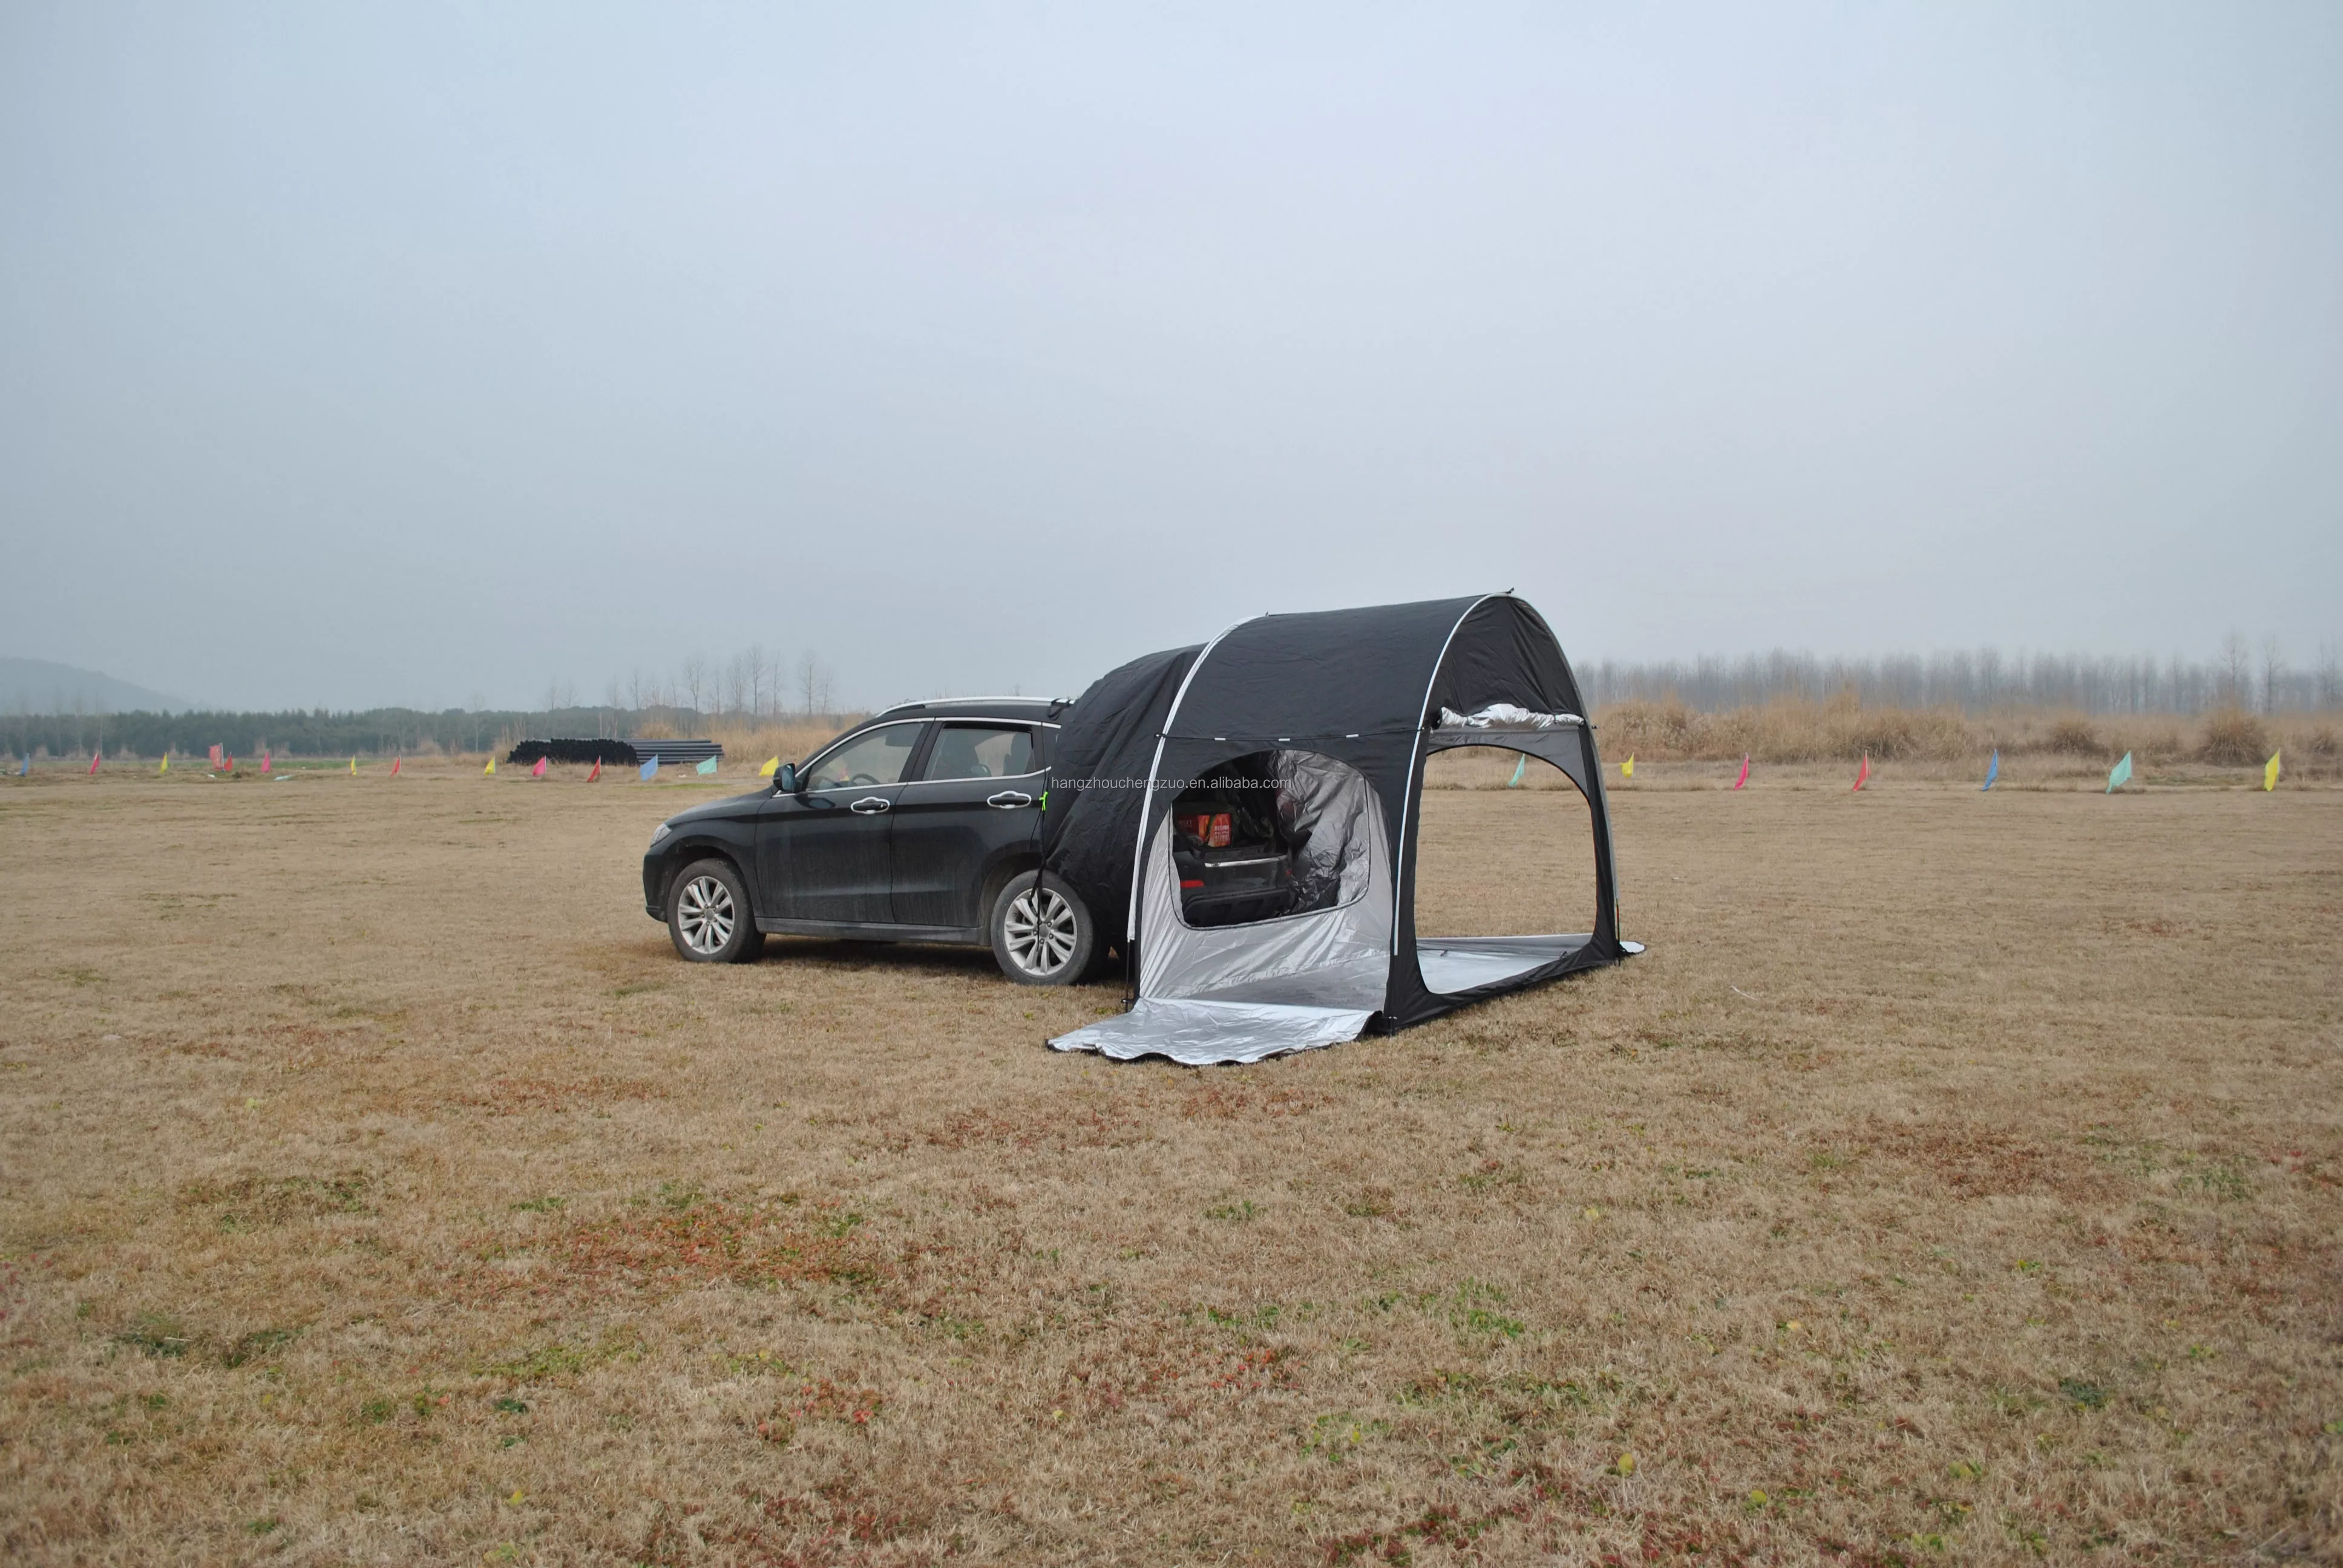 Cheap Goat Tents CZX 557 Car Awning Sun Shelter tent,SUV Rear Tent,Portable Waterproof car rear tent can be used as bike tent or storage tent   